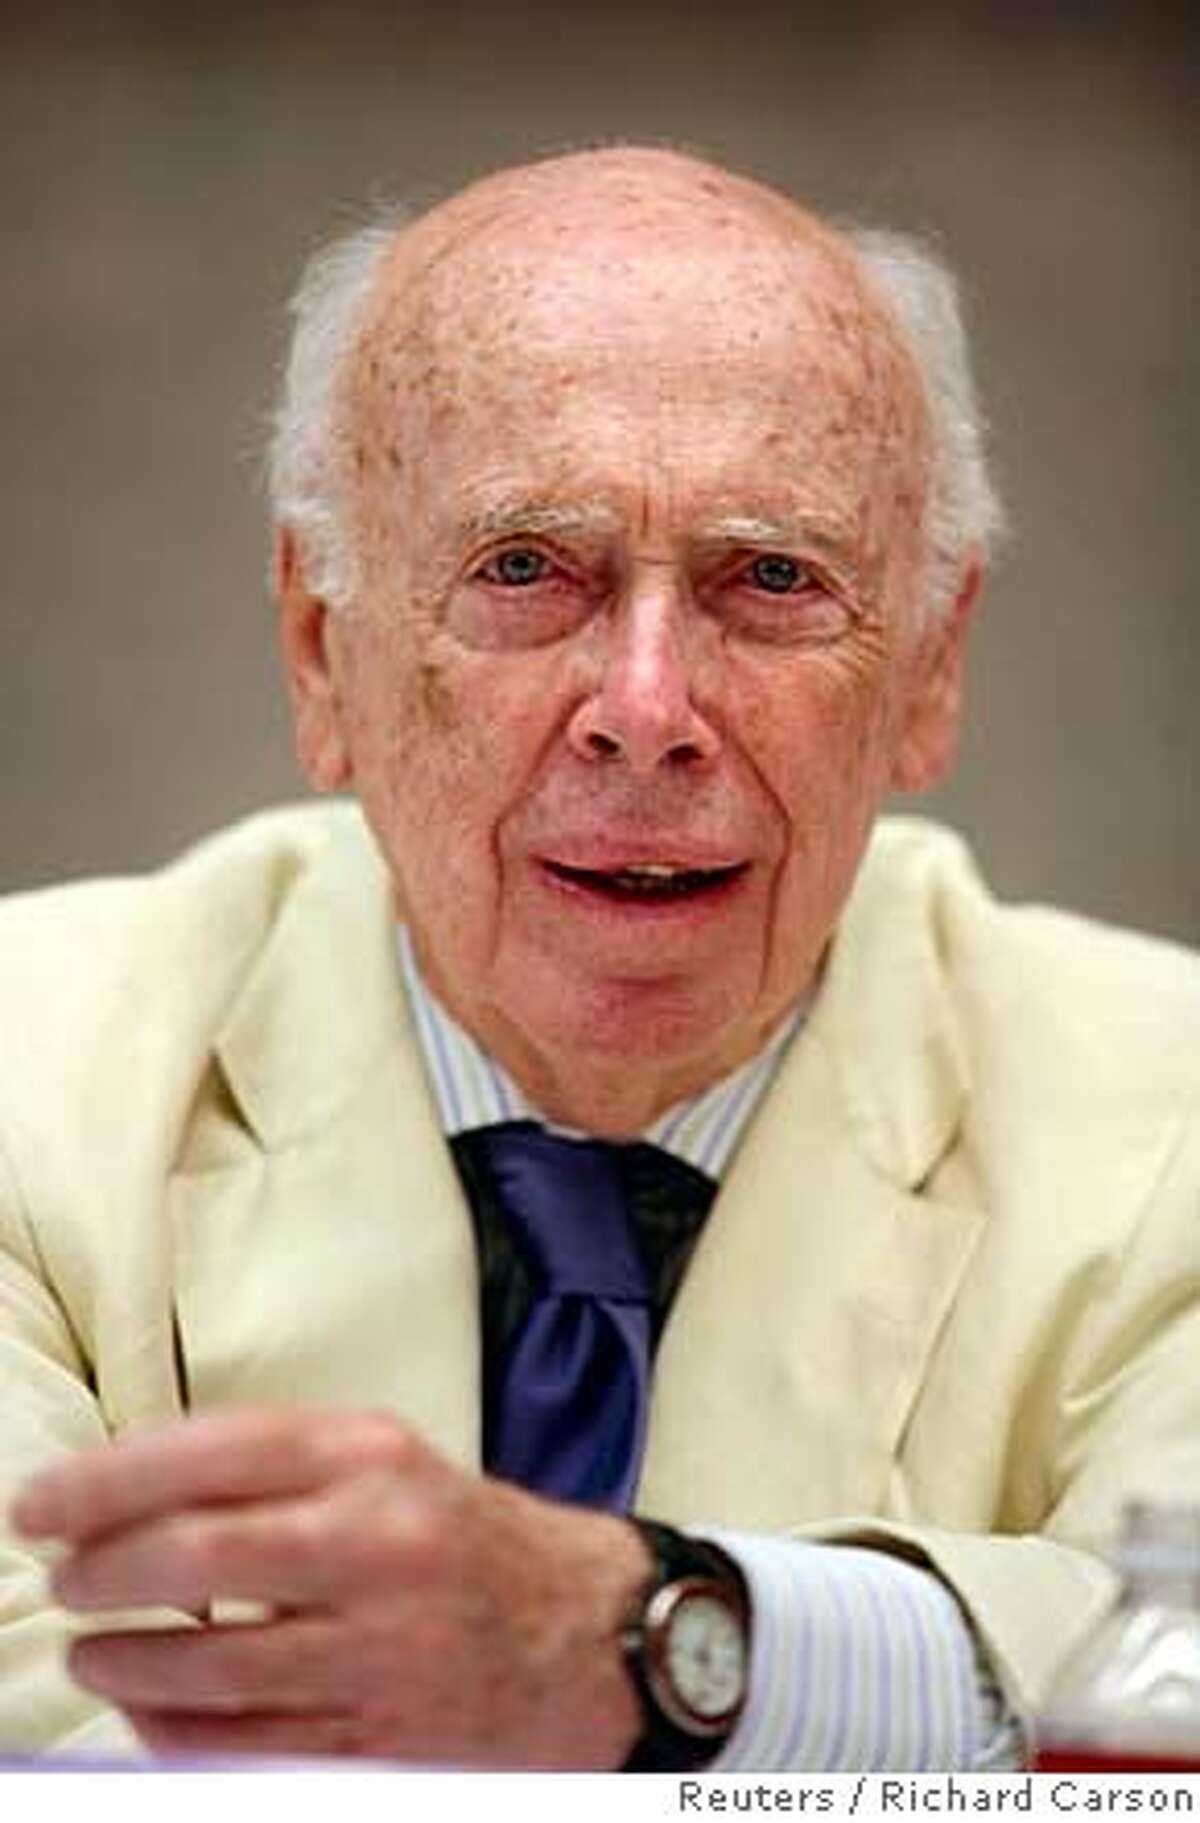 James D. Watson, co-discoverer of the DNA helix and father of the Human Genome Project, speaks at the Baylor College of Medicine's Human Genome Sequencing Center in Houston in this May 31, 2007 file photo. A prominent New York scientific laboratory suspended Nobel Prize-winning DNA authority Dr. James Watson on October 18, 2007 night over racially insensitive comments he was quoted as making in an interview earlier in the week. REUTERS/Richard Carson/Files (UNITED STATES) Ran on: 10-26-2007 James Watson said he despaired for Africa because blacks intel- ligence isnt like whites. Ran on: 10-26-2007